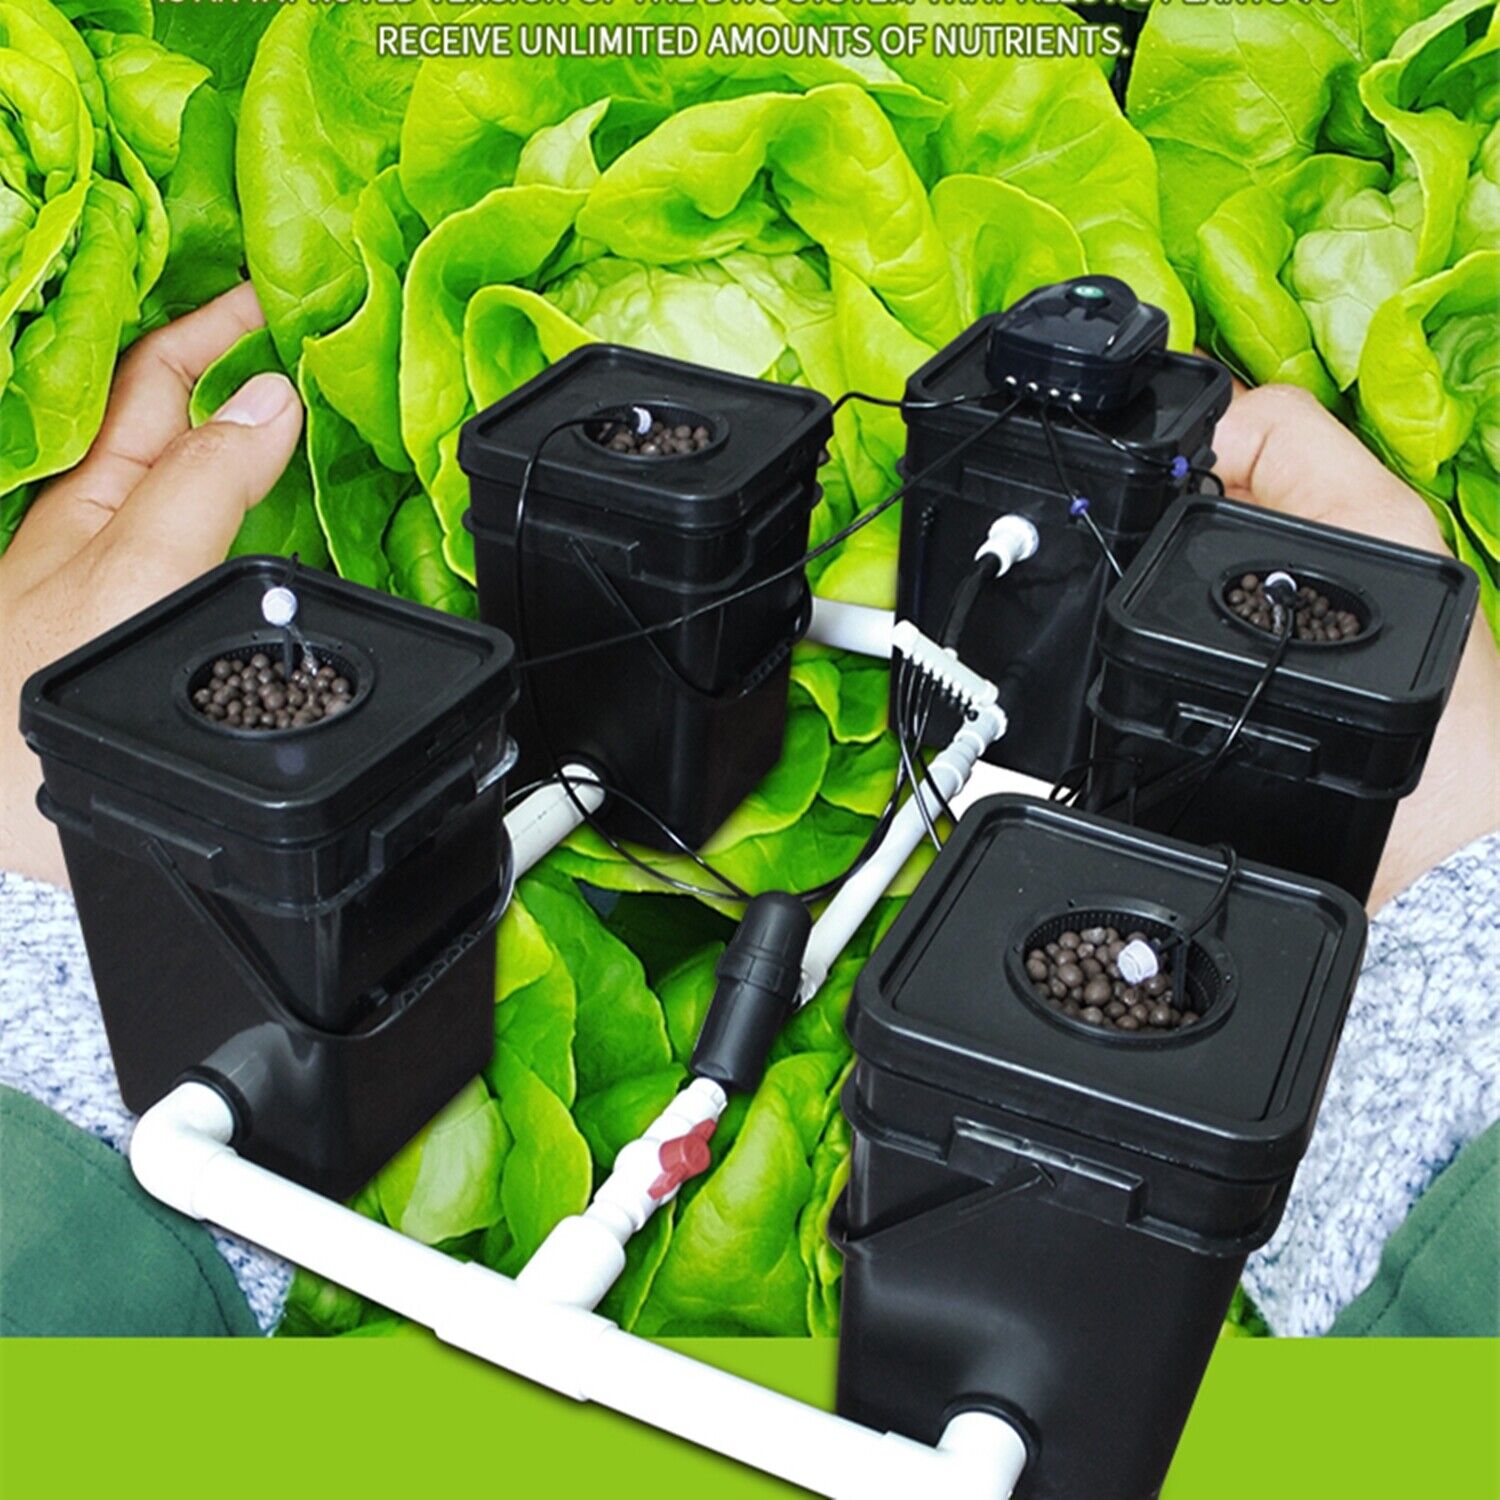 RDWC 4 Hydroponic Growing Kit Recirculating Deep Water Culture Automated System